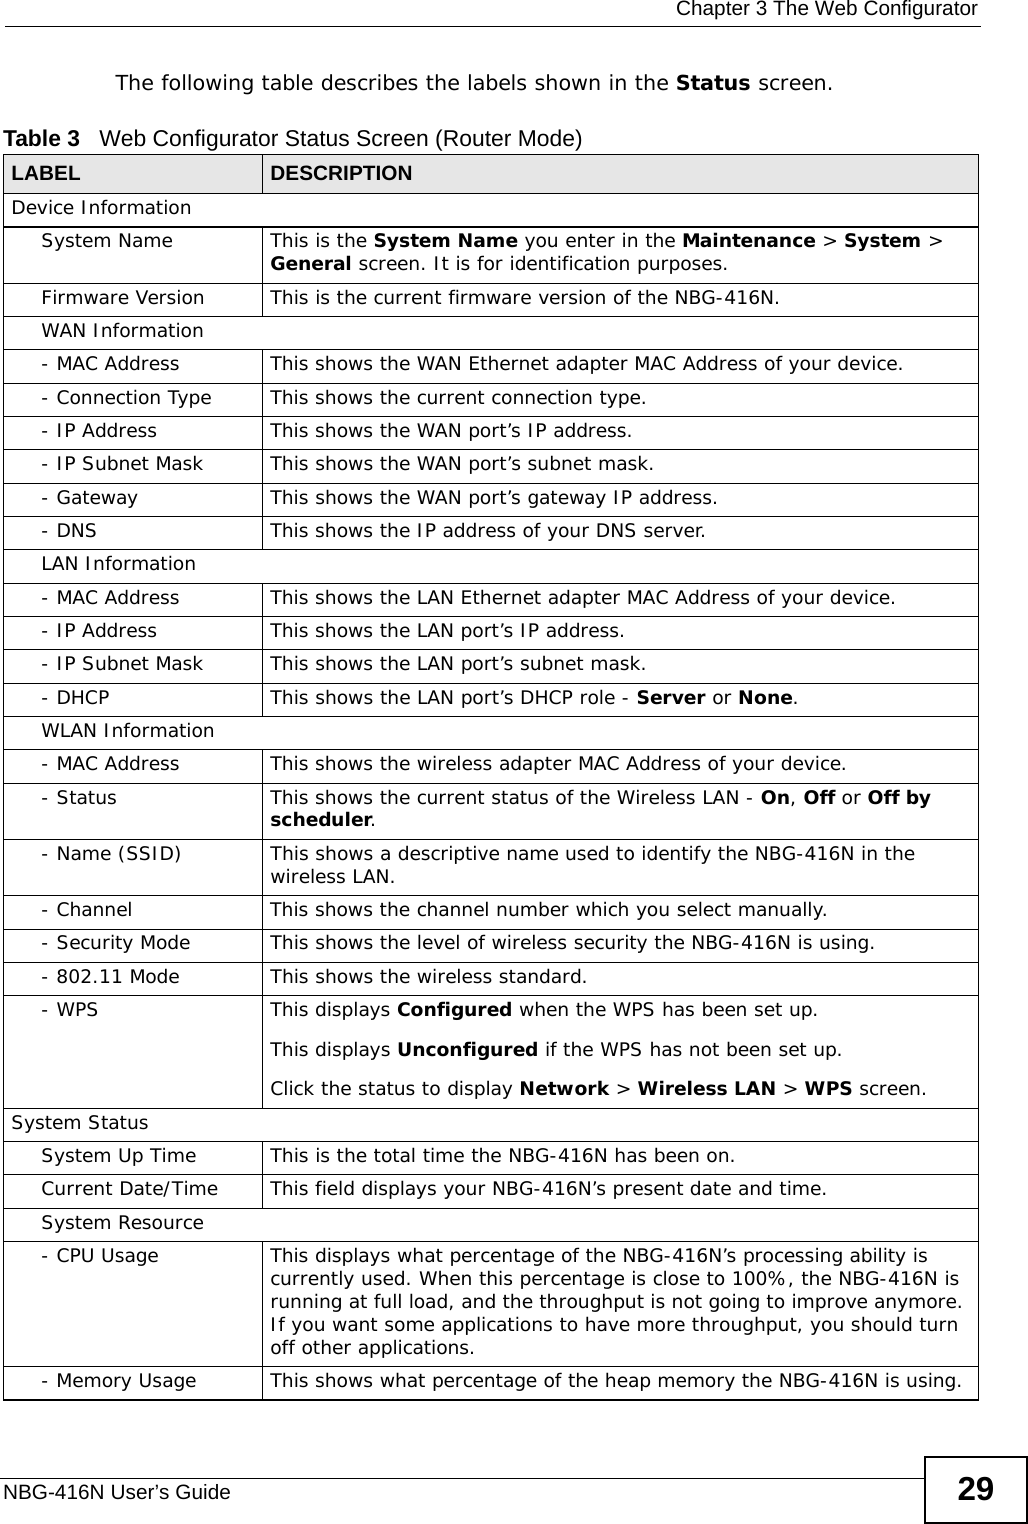  Chapter 3 The Web ConfiguratorNBG-416N User’s Guide 29The following table describes the labels shown in the Status screen.Table 3   Web Configurator Status Screen (Router Mode)  LABEL DESCRIPTIONDevice InformationSystem Name This is the System Name you enter in the Maintenance &gt; System &gt; General screen. It is for identification purposes.Firmware Version This is the current firmware version of the NBG-416N. WAN Information- MAC Address This shows the WAN Ethernet adapter MAC Address of your device.- Connection Type This shows the current connection type.- IP Address This shows the WAN port’s IP address.- IP Subnet Mask This shows the WAN port’s subnet mask.- Gateway This shows the WAN port’s gateway IP address.- DNS This shows the IP address of your DNS server.LAN Information- MAC Address This shows the LAN Ethernet adapter MAC Address of your device.- IP Address This shows the LAN port’s IP address.- IP Subnet Mask This shows the LAN port’s subnet mask.- DHCP This shows the LAN port’s DHCP role - Server or None.WLAN Information- MAC Address This shows the wireless adapter MAC Address of your device.- Status This shows the current status of the Wireless LAN - On, Off or Off by scheduler.- Name (SSID) This shows a descriptive name used to identify the NBG-416N in the wireless LAN. - Channel This shows the channel number which you select manually.- Security Mode This shows the level of wireless security the NBG-416N is using.- 802.11 Mode This shows the wireless standard.- WPS This displays Configured when the WPS has been set up. This displays Unconfigured if the WPS has not been set up.Click the status to display Network &gt; Wireless LAN &gt; WPS screen.System StatusSystem Up Time This is the total time the NBG-416N has been on.Current Date/Time This field displays your NBG-416N’s present date and time.System Resource- CPU Usage This displays what percentage of the NBG-416N’s processing ability is currently used. When this percentage is close to 100%, the NBG-416N is running at full load, and the throughput is not going to improve anymore. If you want some applications to have more throughput, you should turn off other applications.- Memory Usage This shows what percentage of the heap memory the NBG-416N is using. 